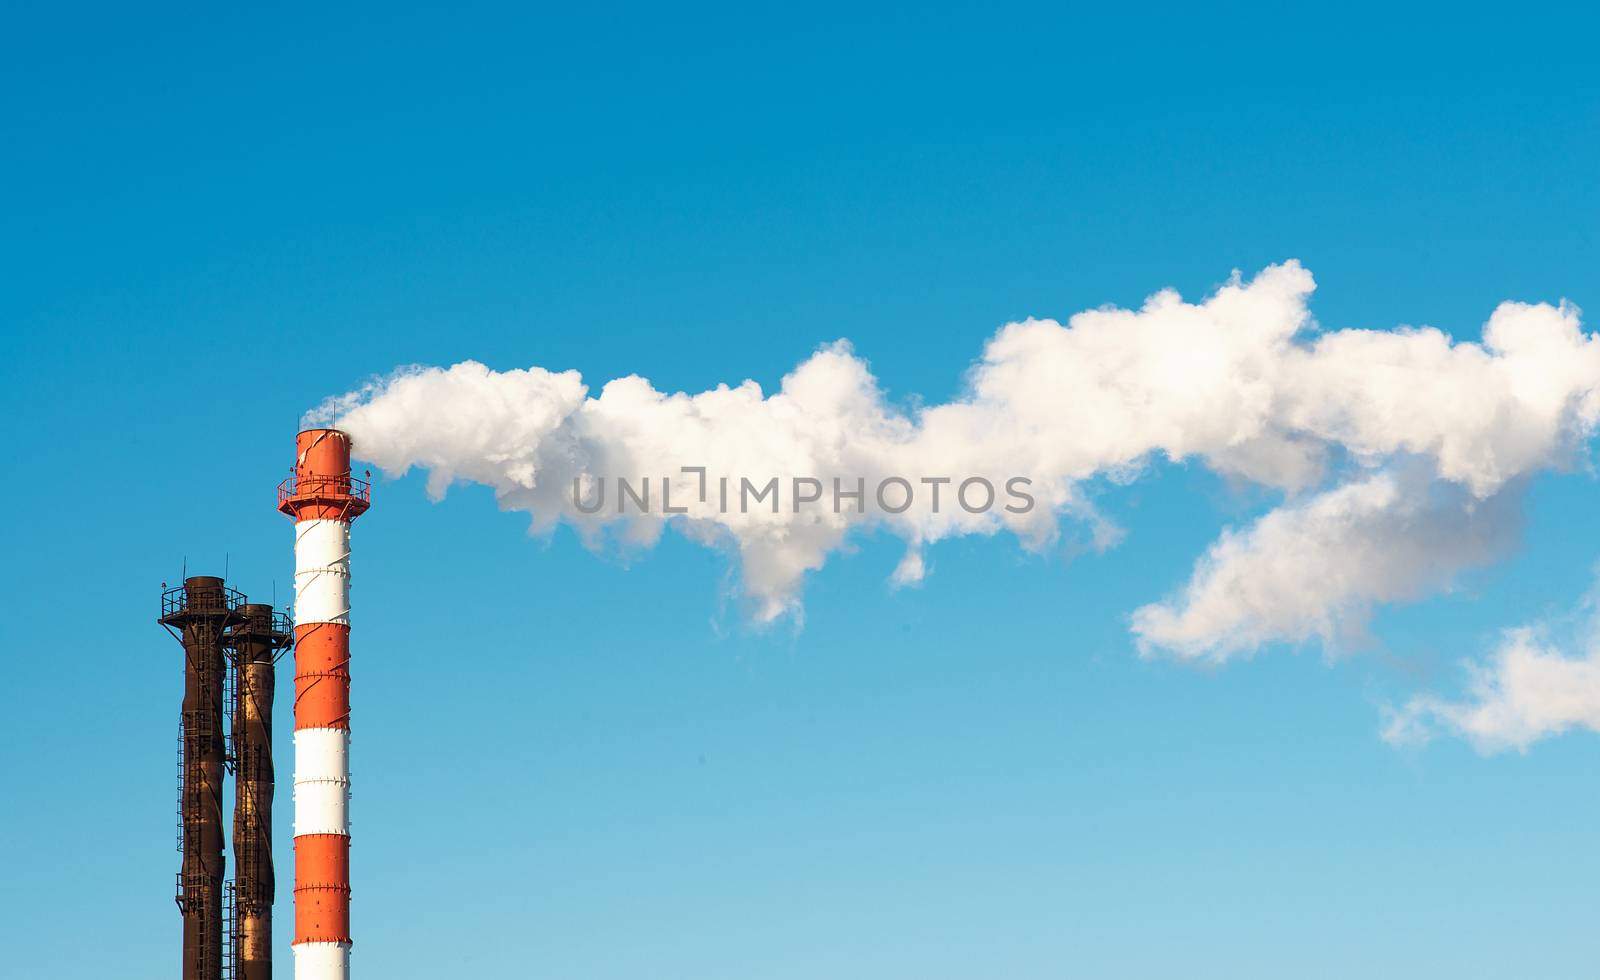  Atomic Power Station with blue sky and clouds, close up view